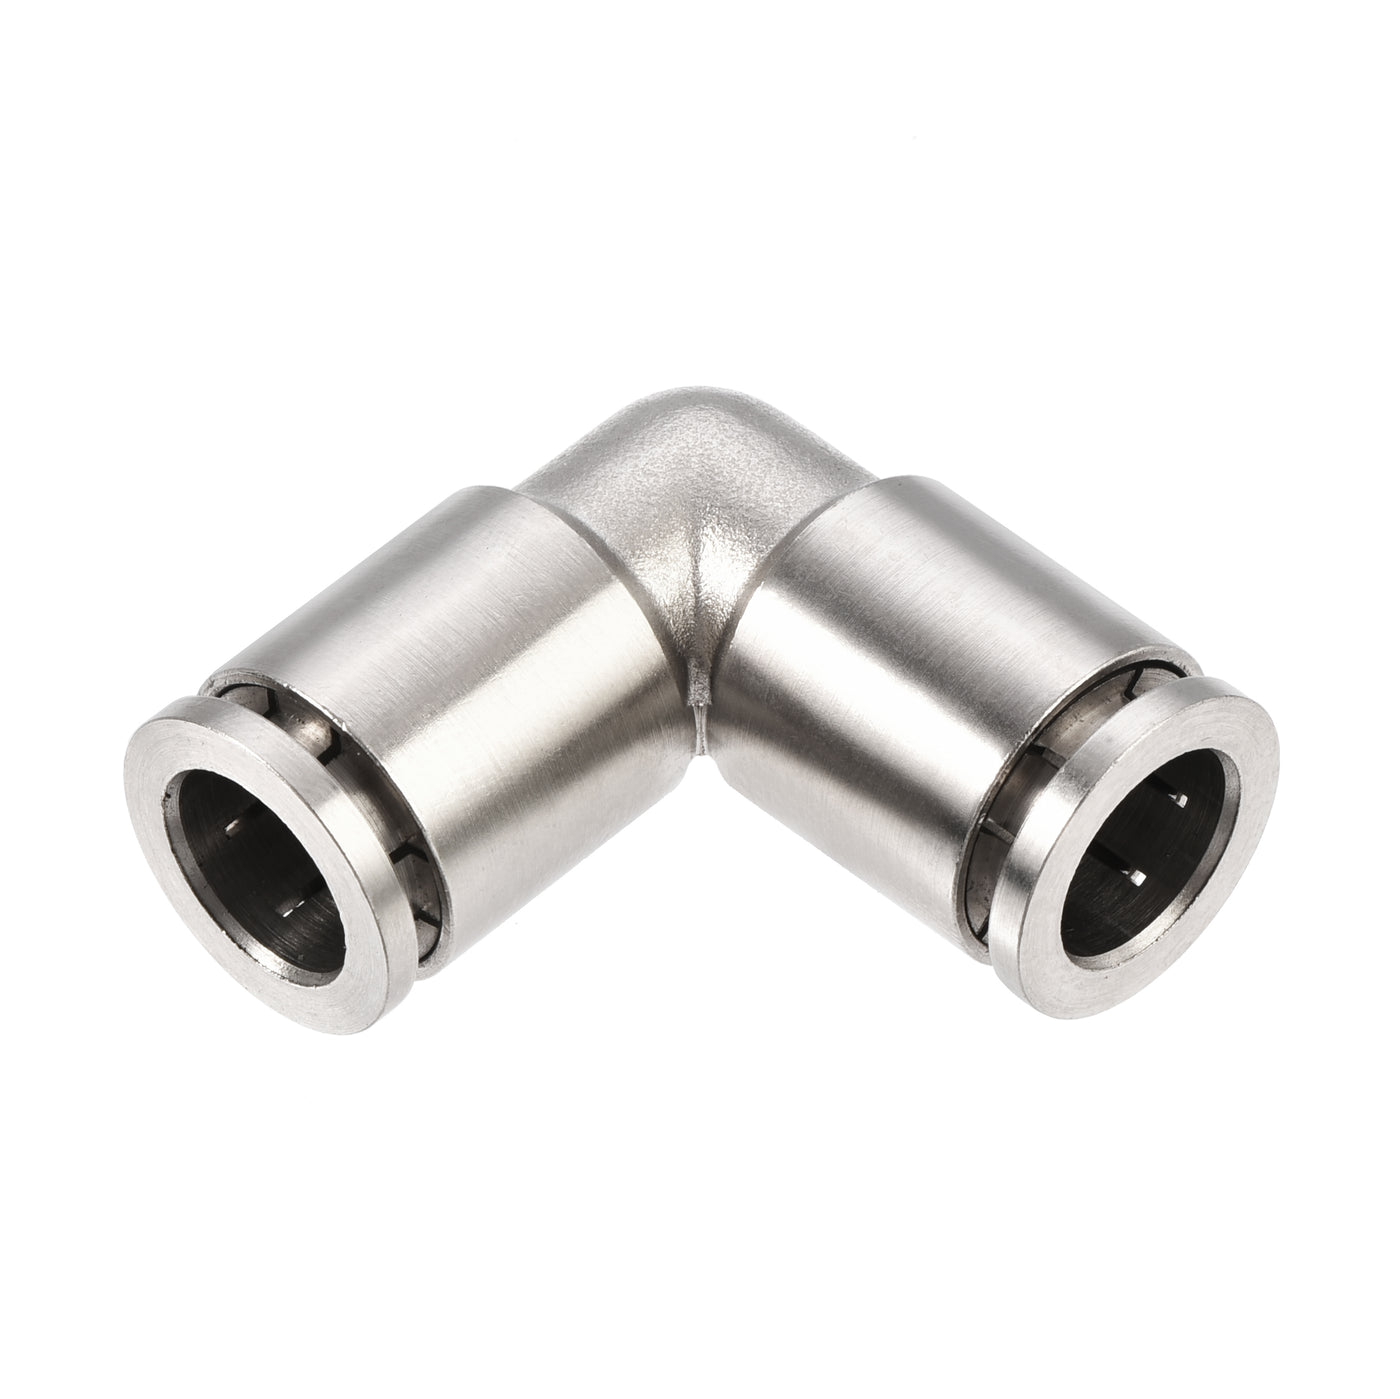 Uxcell Uxcell Push to Connect Tube Fitting L Shape Pneumatic Connector for 6mm OD Tube